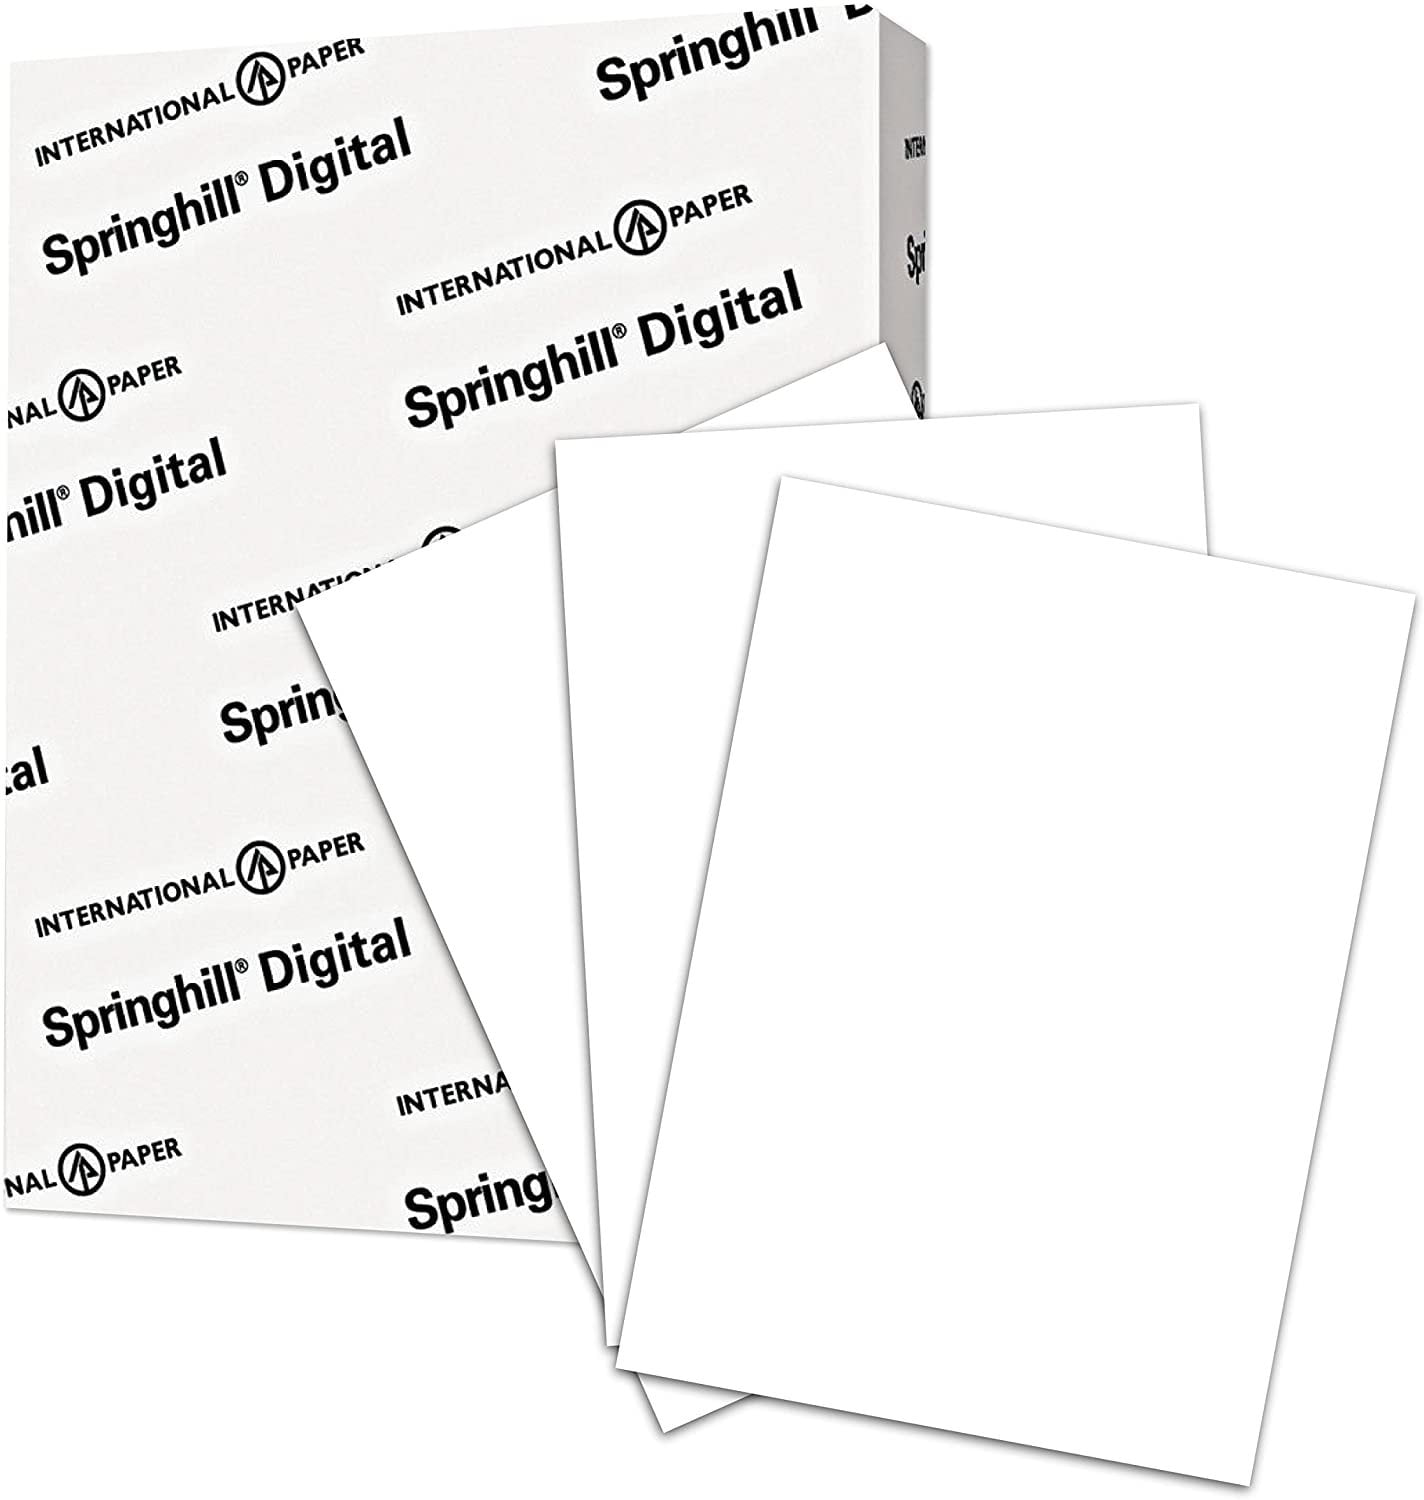 67lb Made In The USA Springhill Digital Vellum Bristol Cover Canary 250 Sheets / 1 Ream, 8.5 x 11 Letter 036000R 